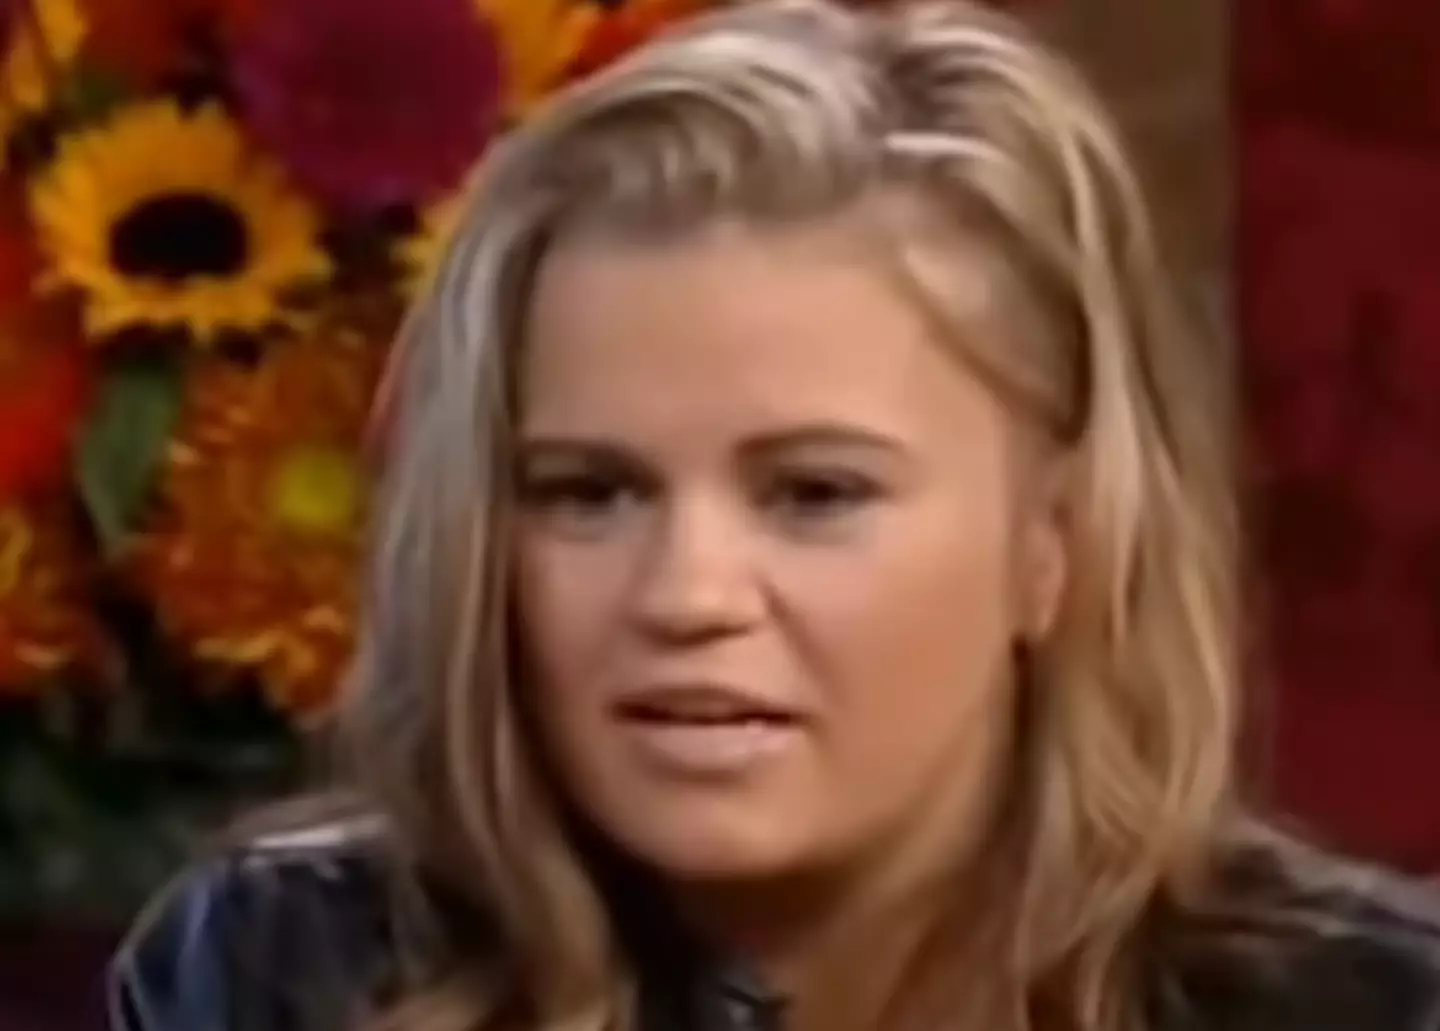 Kerry Katona has opened up about the emotional toll her 2008 This Morning interview took.